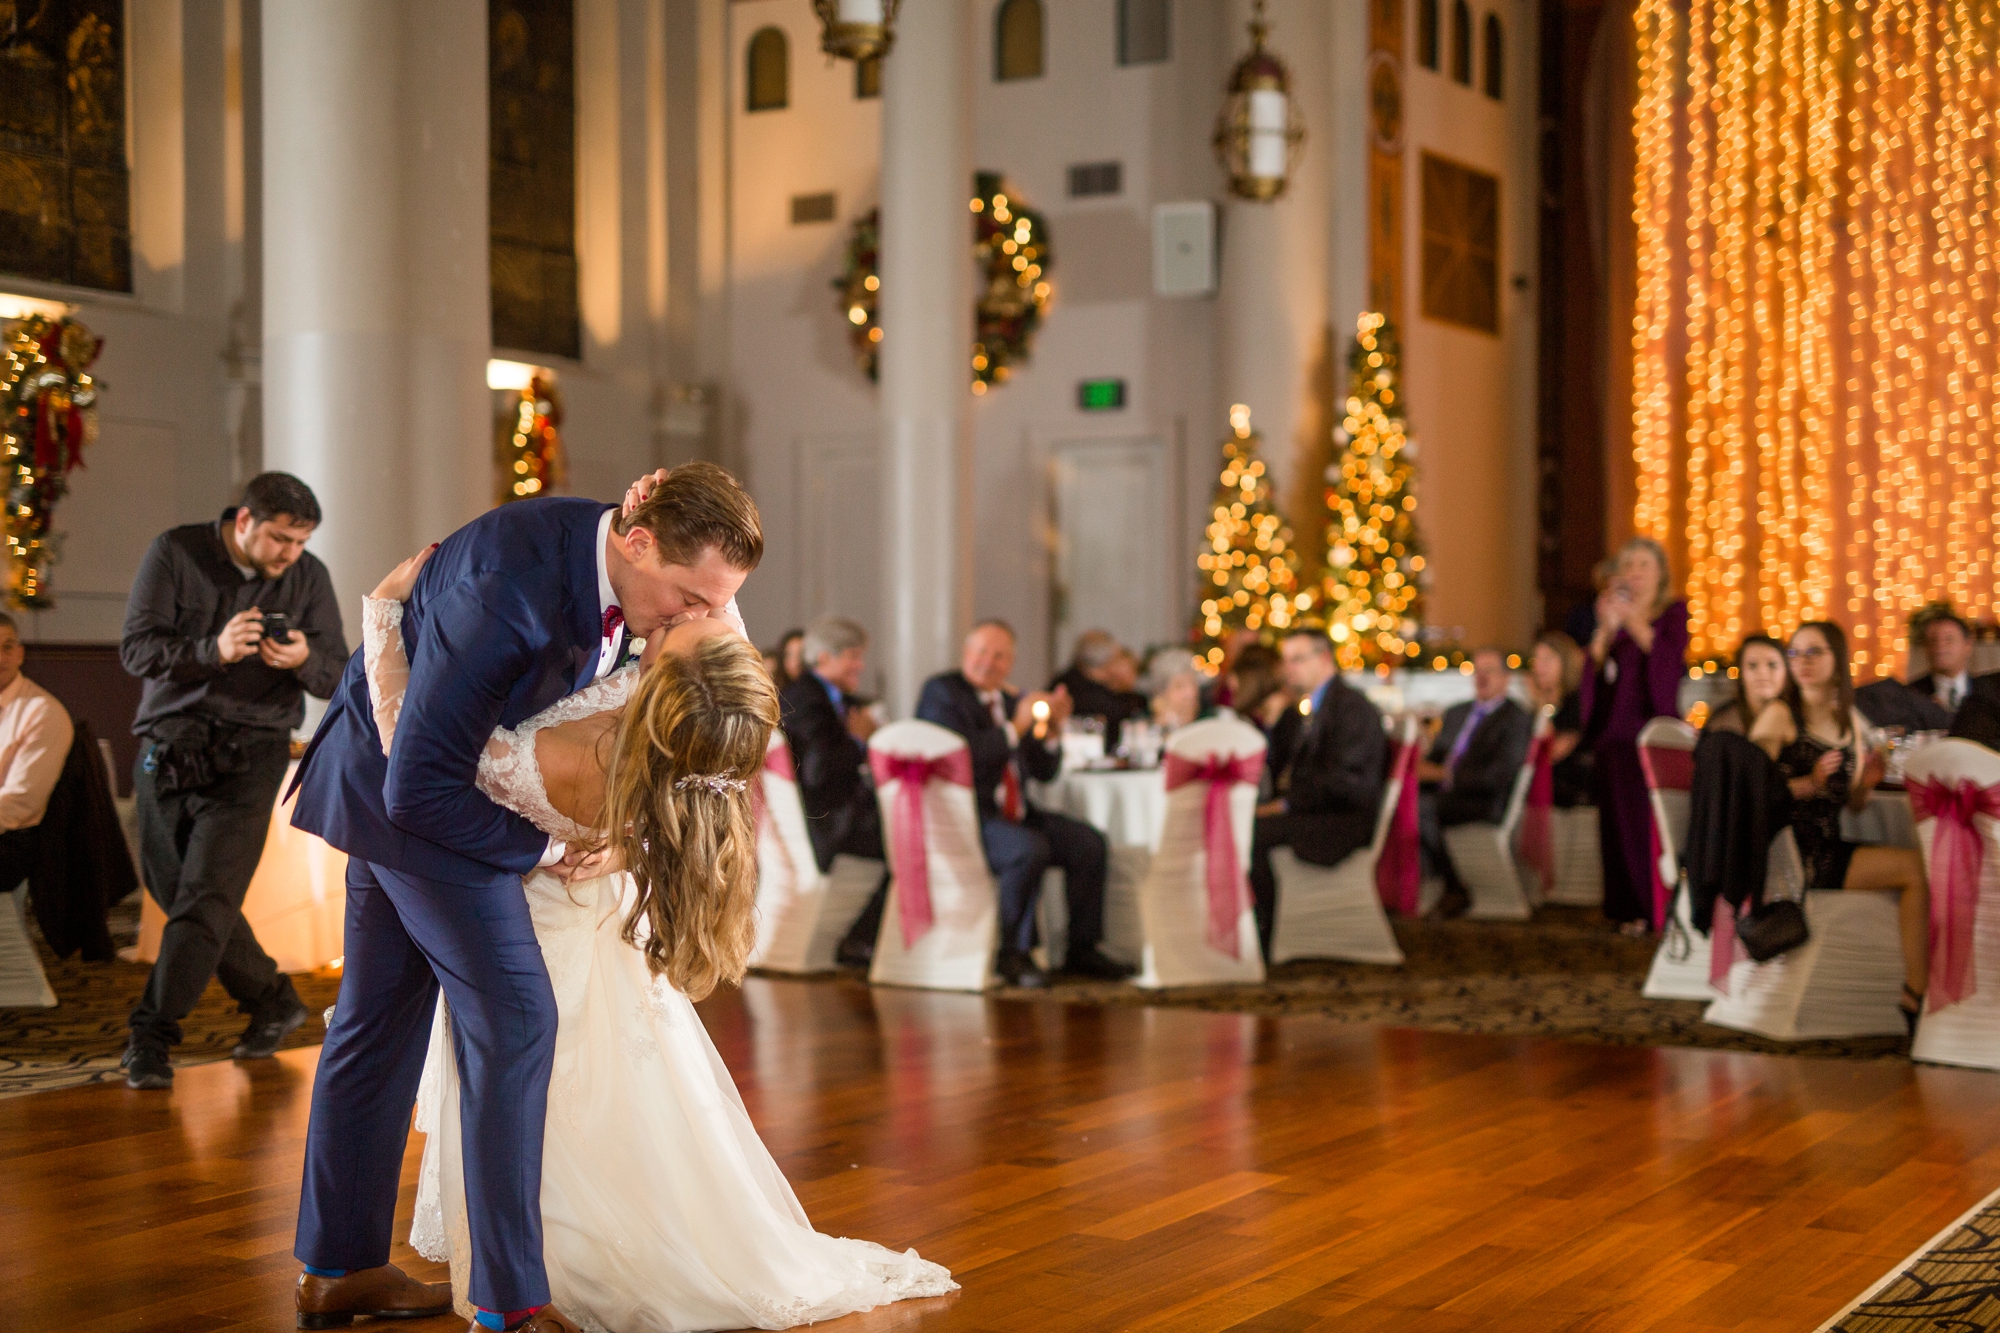 pittsburgh wedding photographer, the best pittsburgh wedding photographers, pittsburgh wedding venues, the grand hall at the priory wedding photos